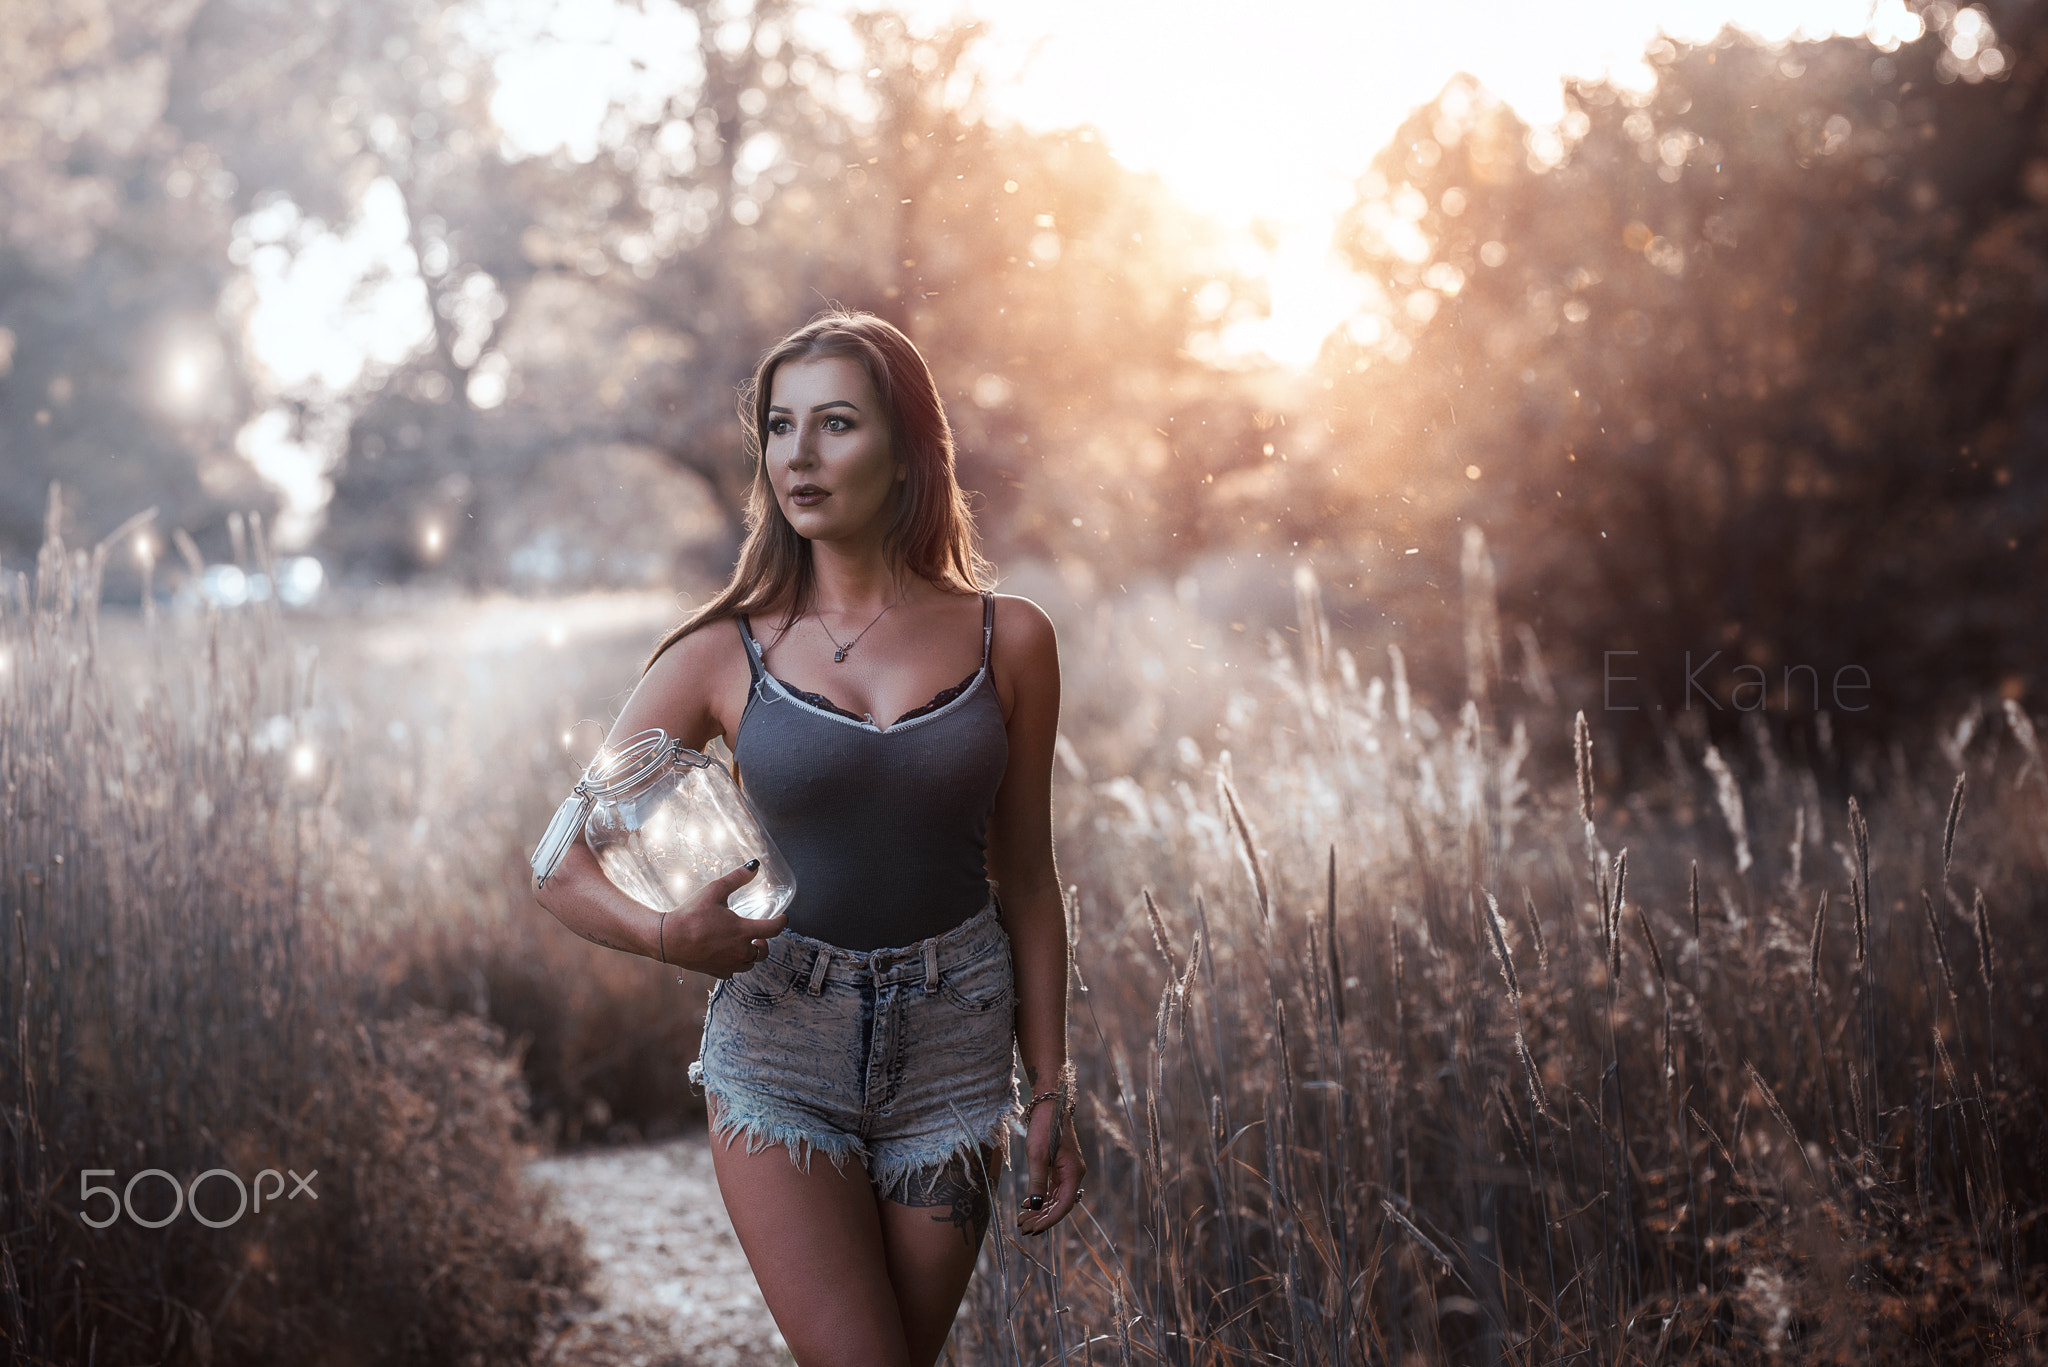 People 2048x1367 Evan Kane jean shorts 500px nature women outdoors women high waisted shorts grey tops